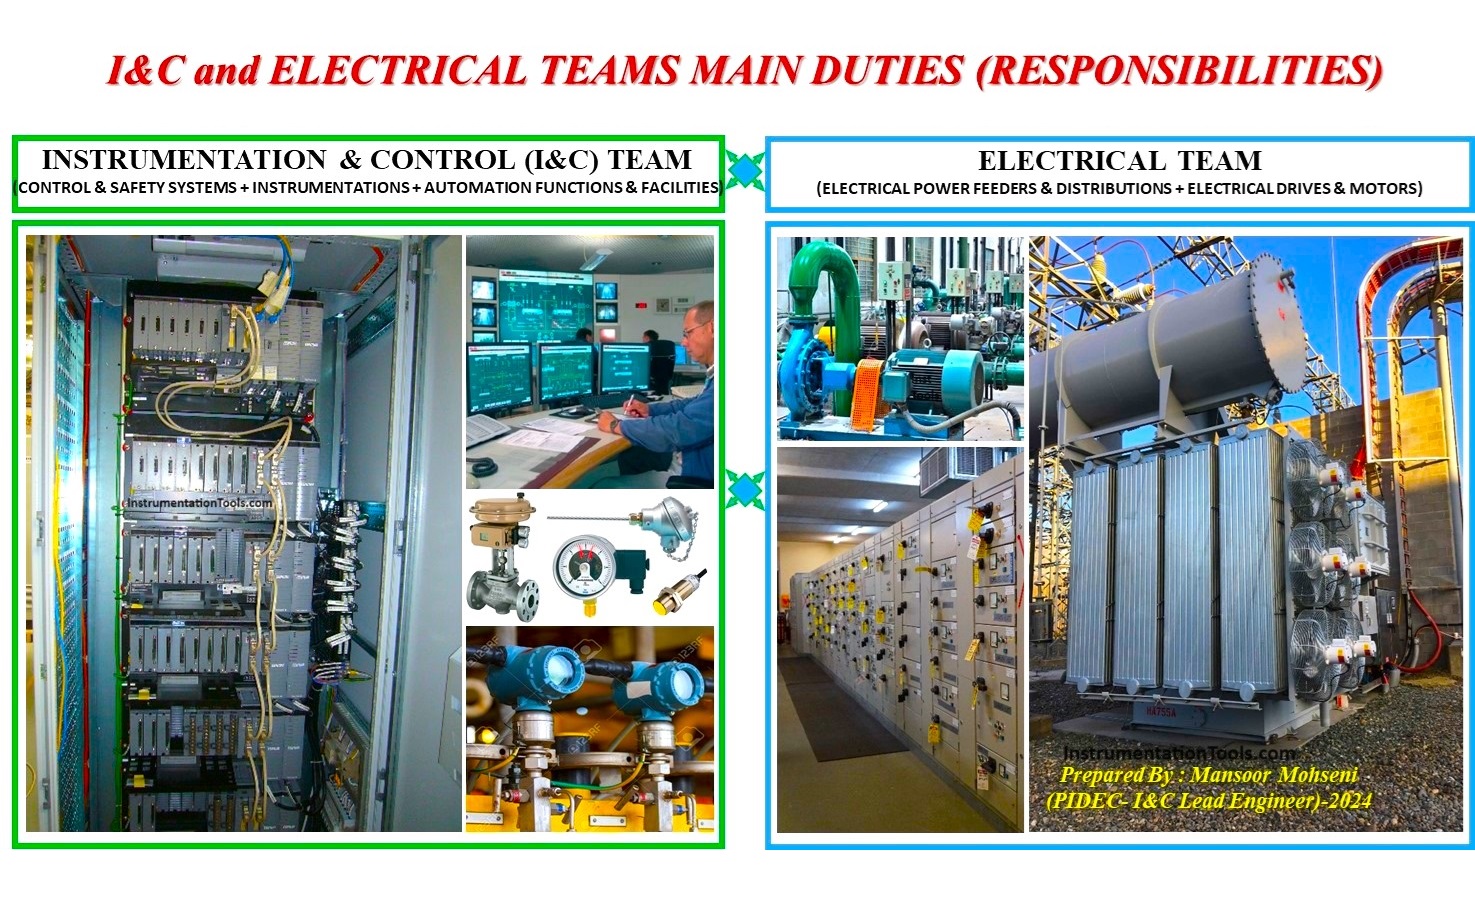 Instrument and Electrical Teams Main Duties